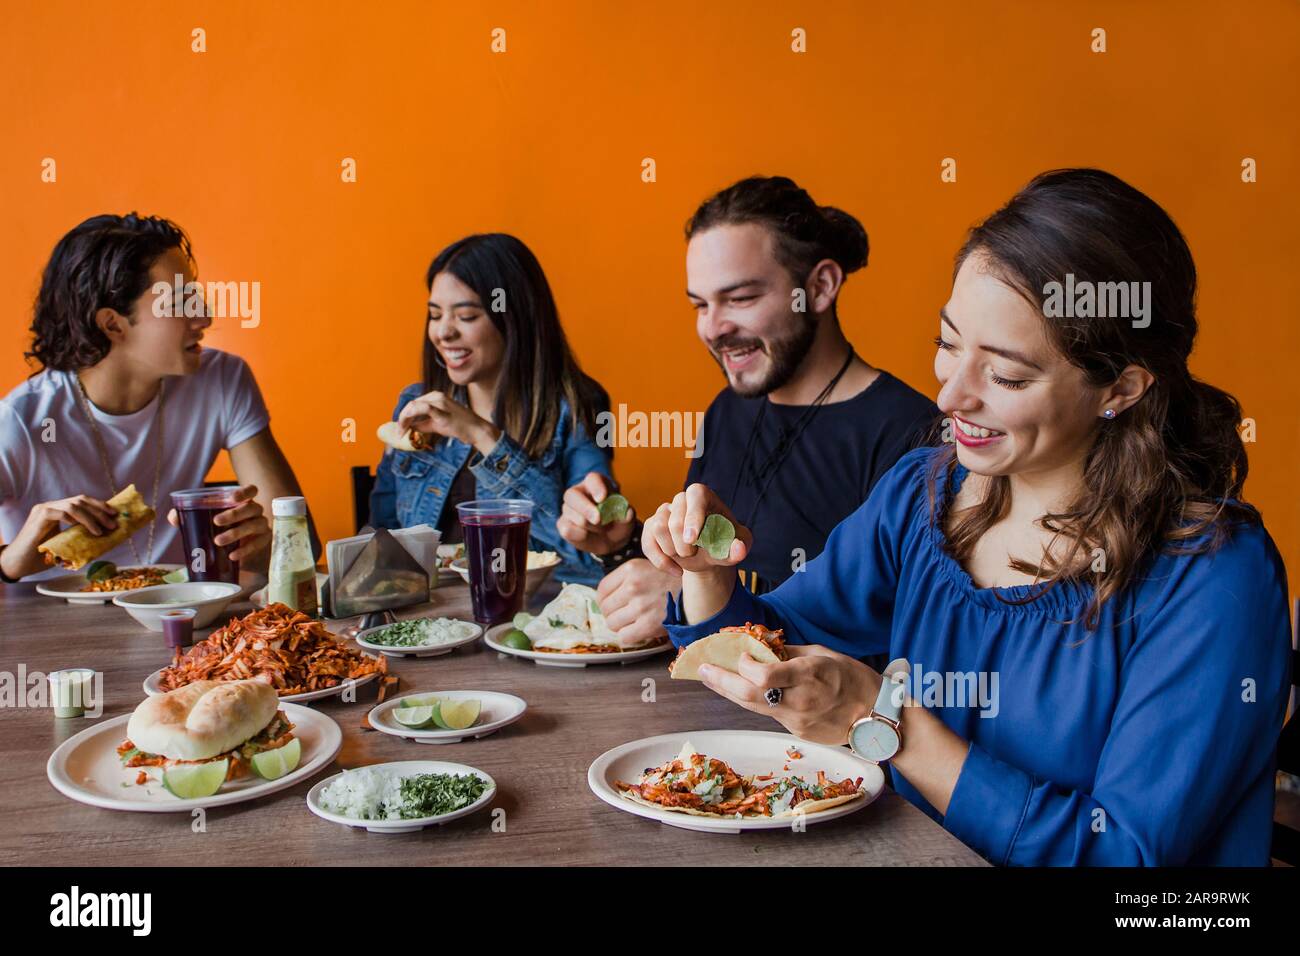 Mexican people eating Tacos al Pastor in a Taqueria in Mexico city Stock Photo